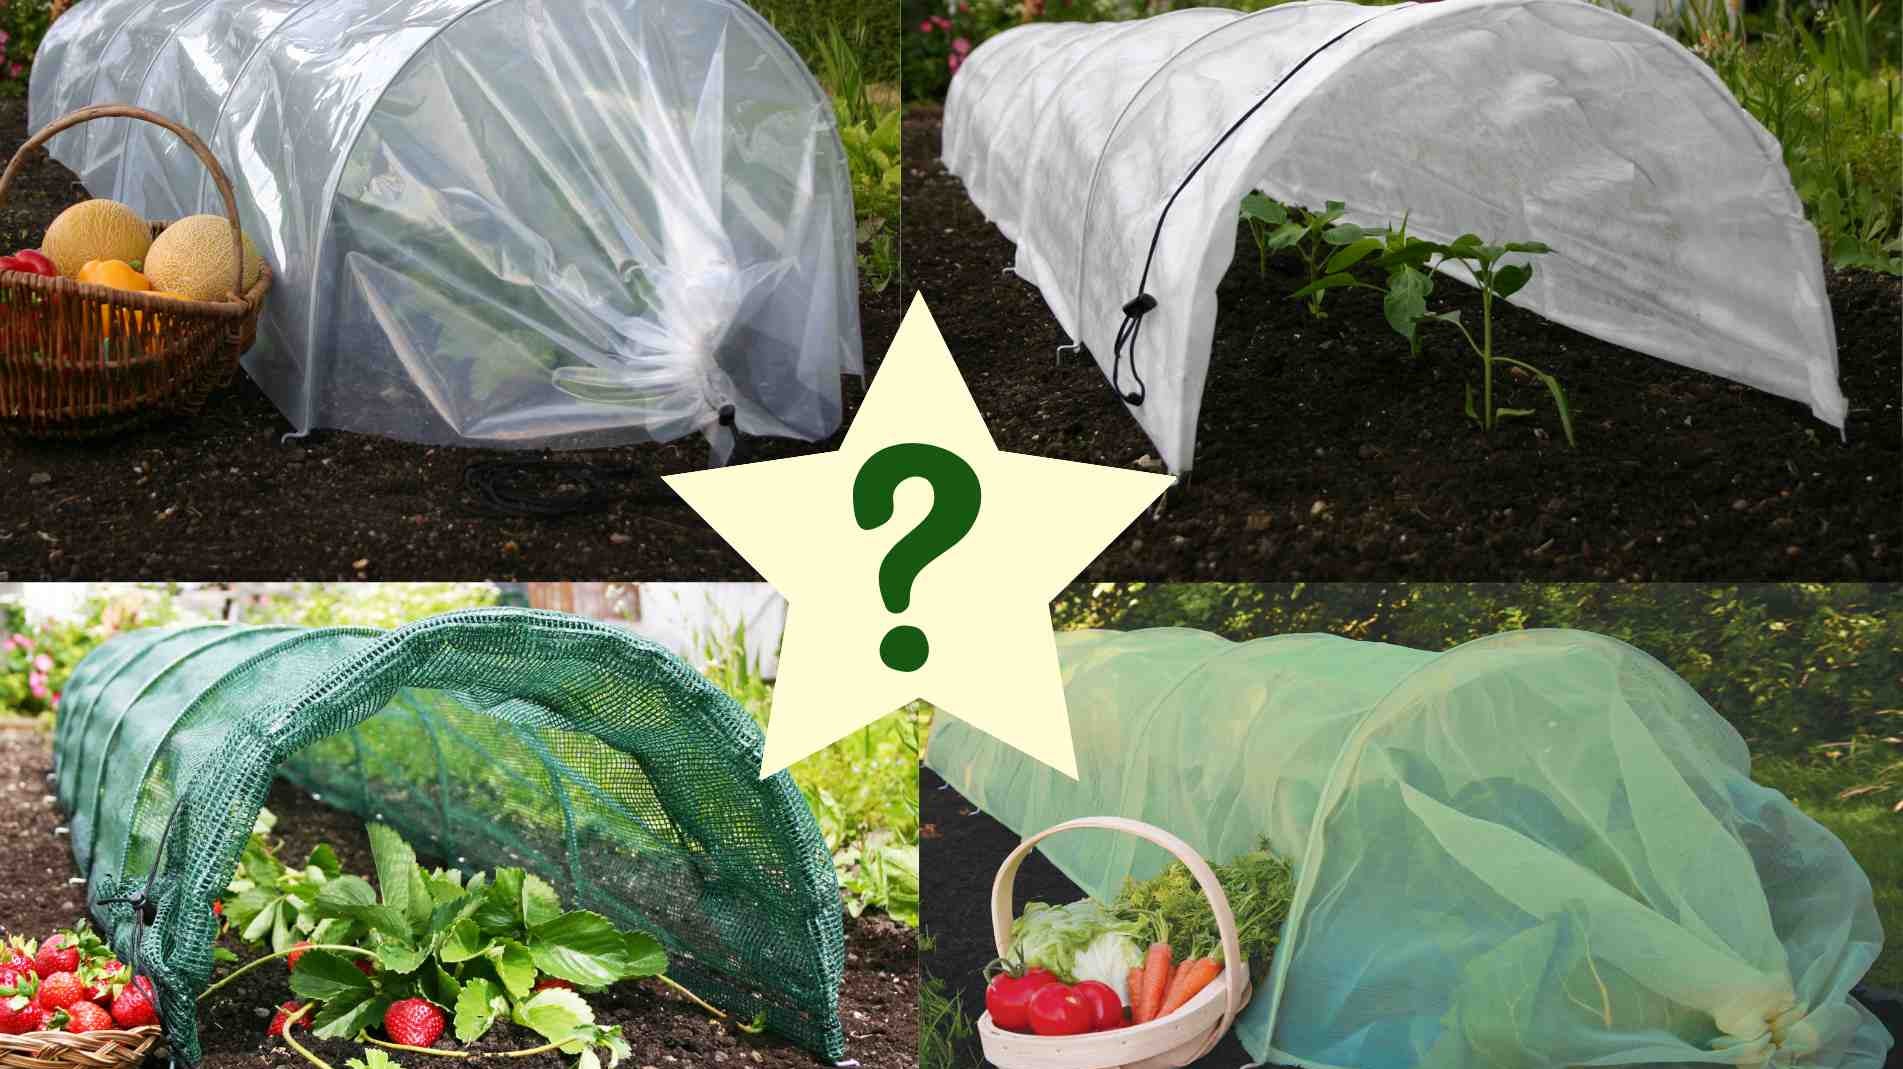 Do I need Plant Protection in my garden?